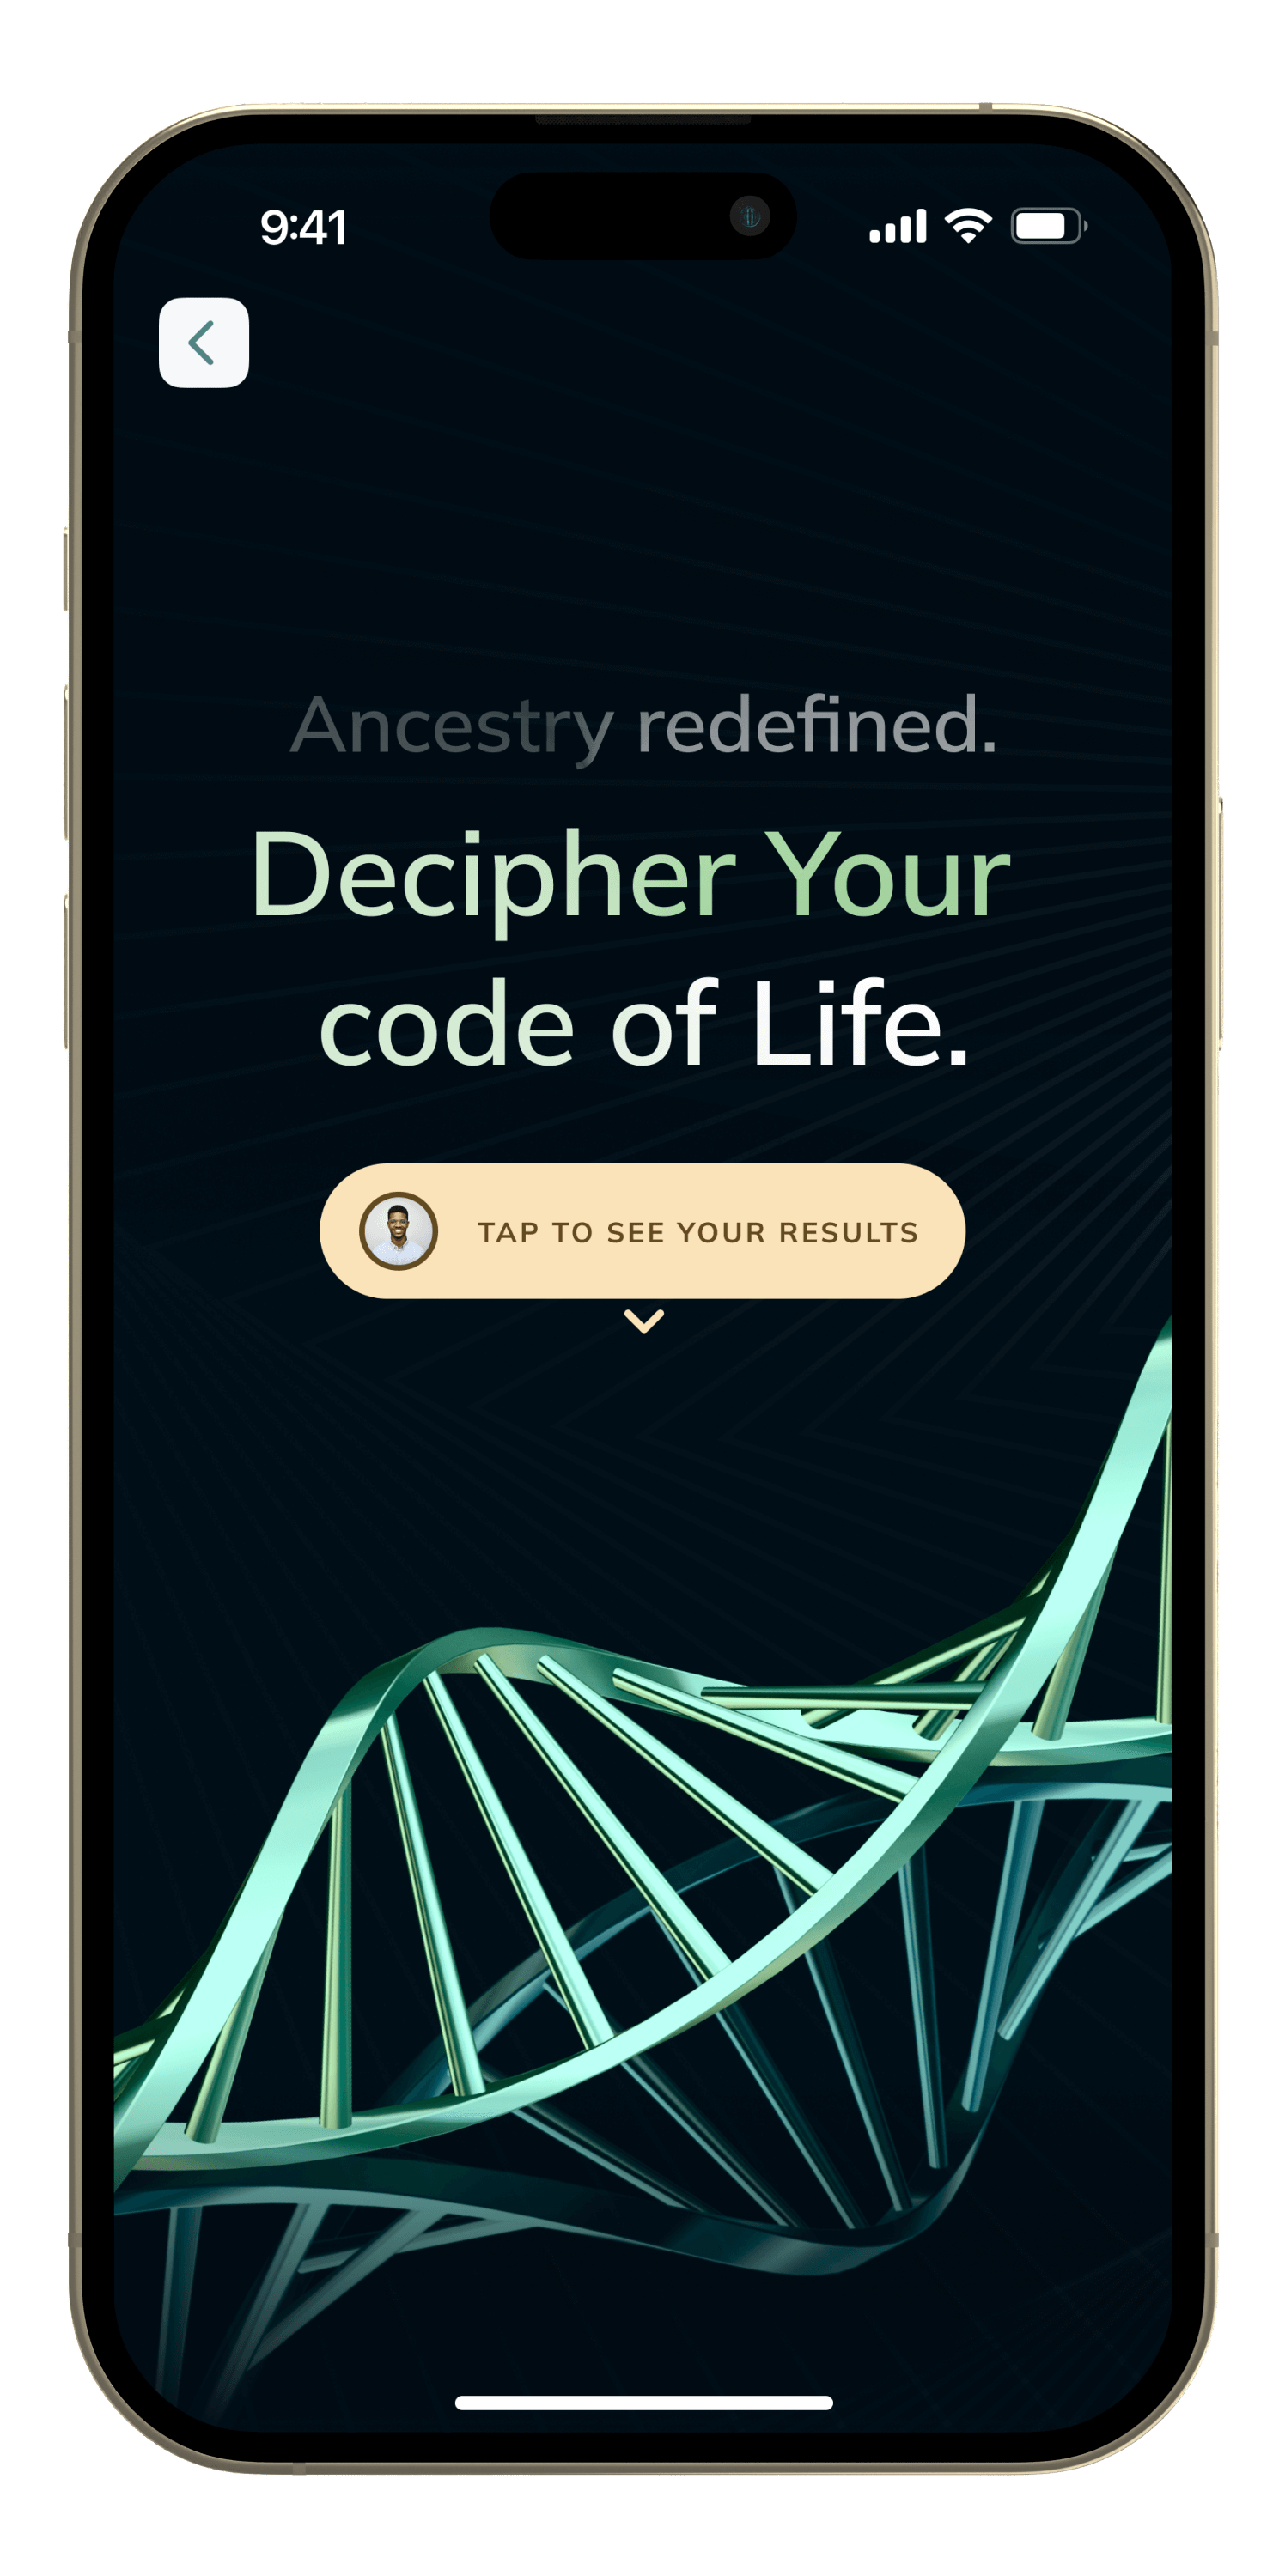 Already own a test? Easily unlock any of our other tests like Ancestry for R649 in-app only.